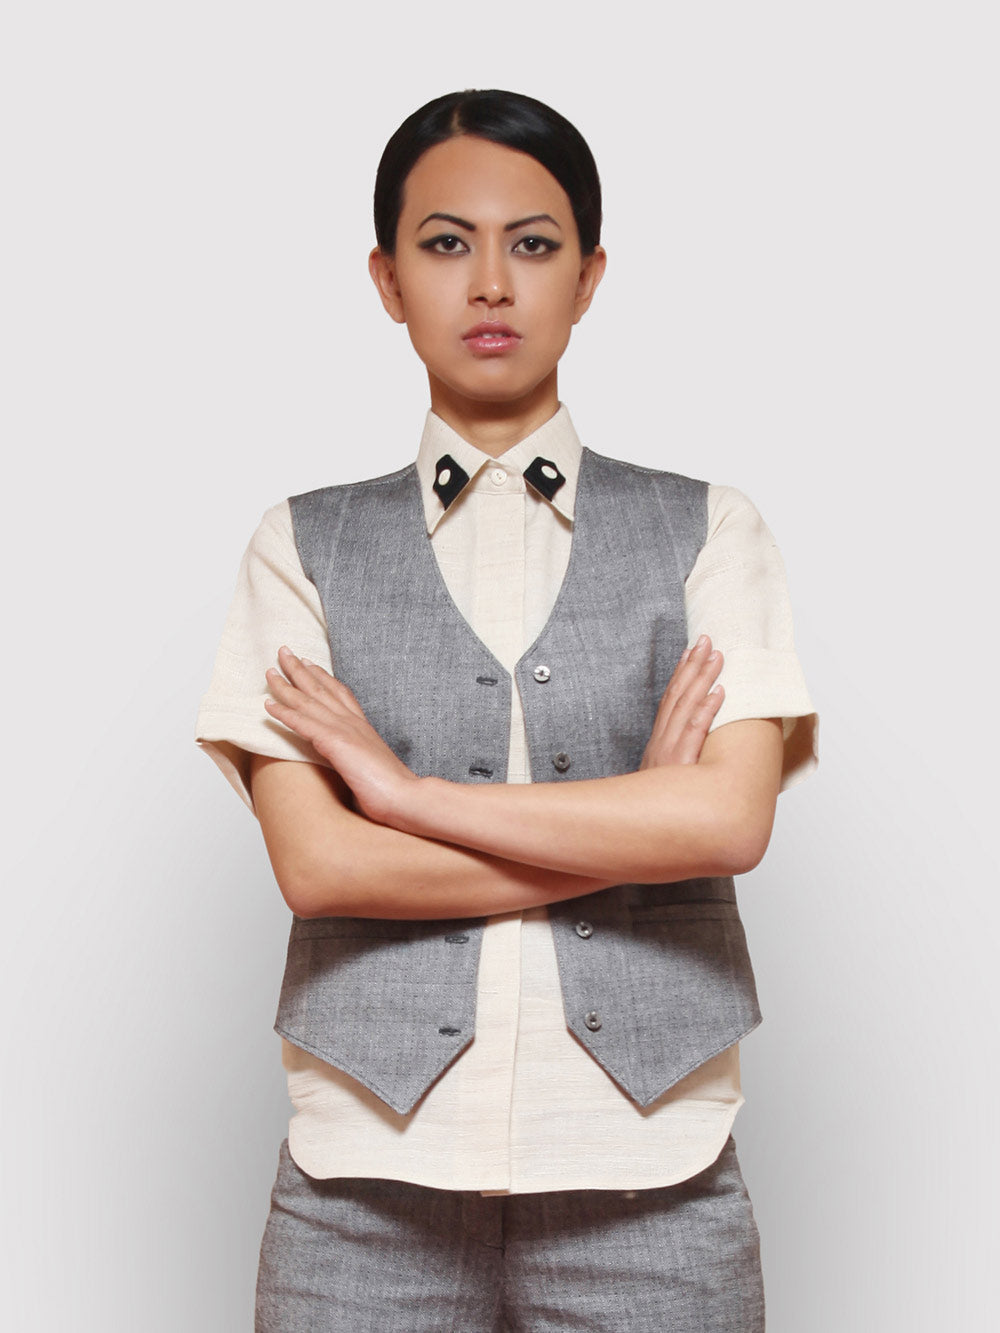 Handwoven Silk shirt with contrast tab collar designed by Khumanthem Atelier